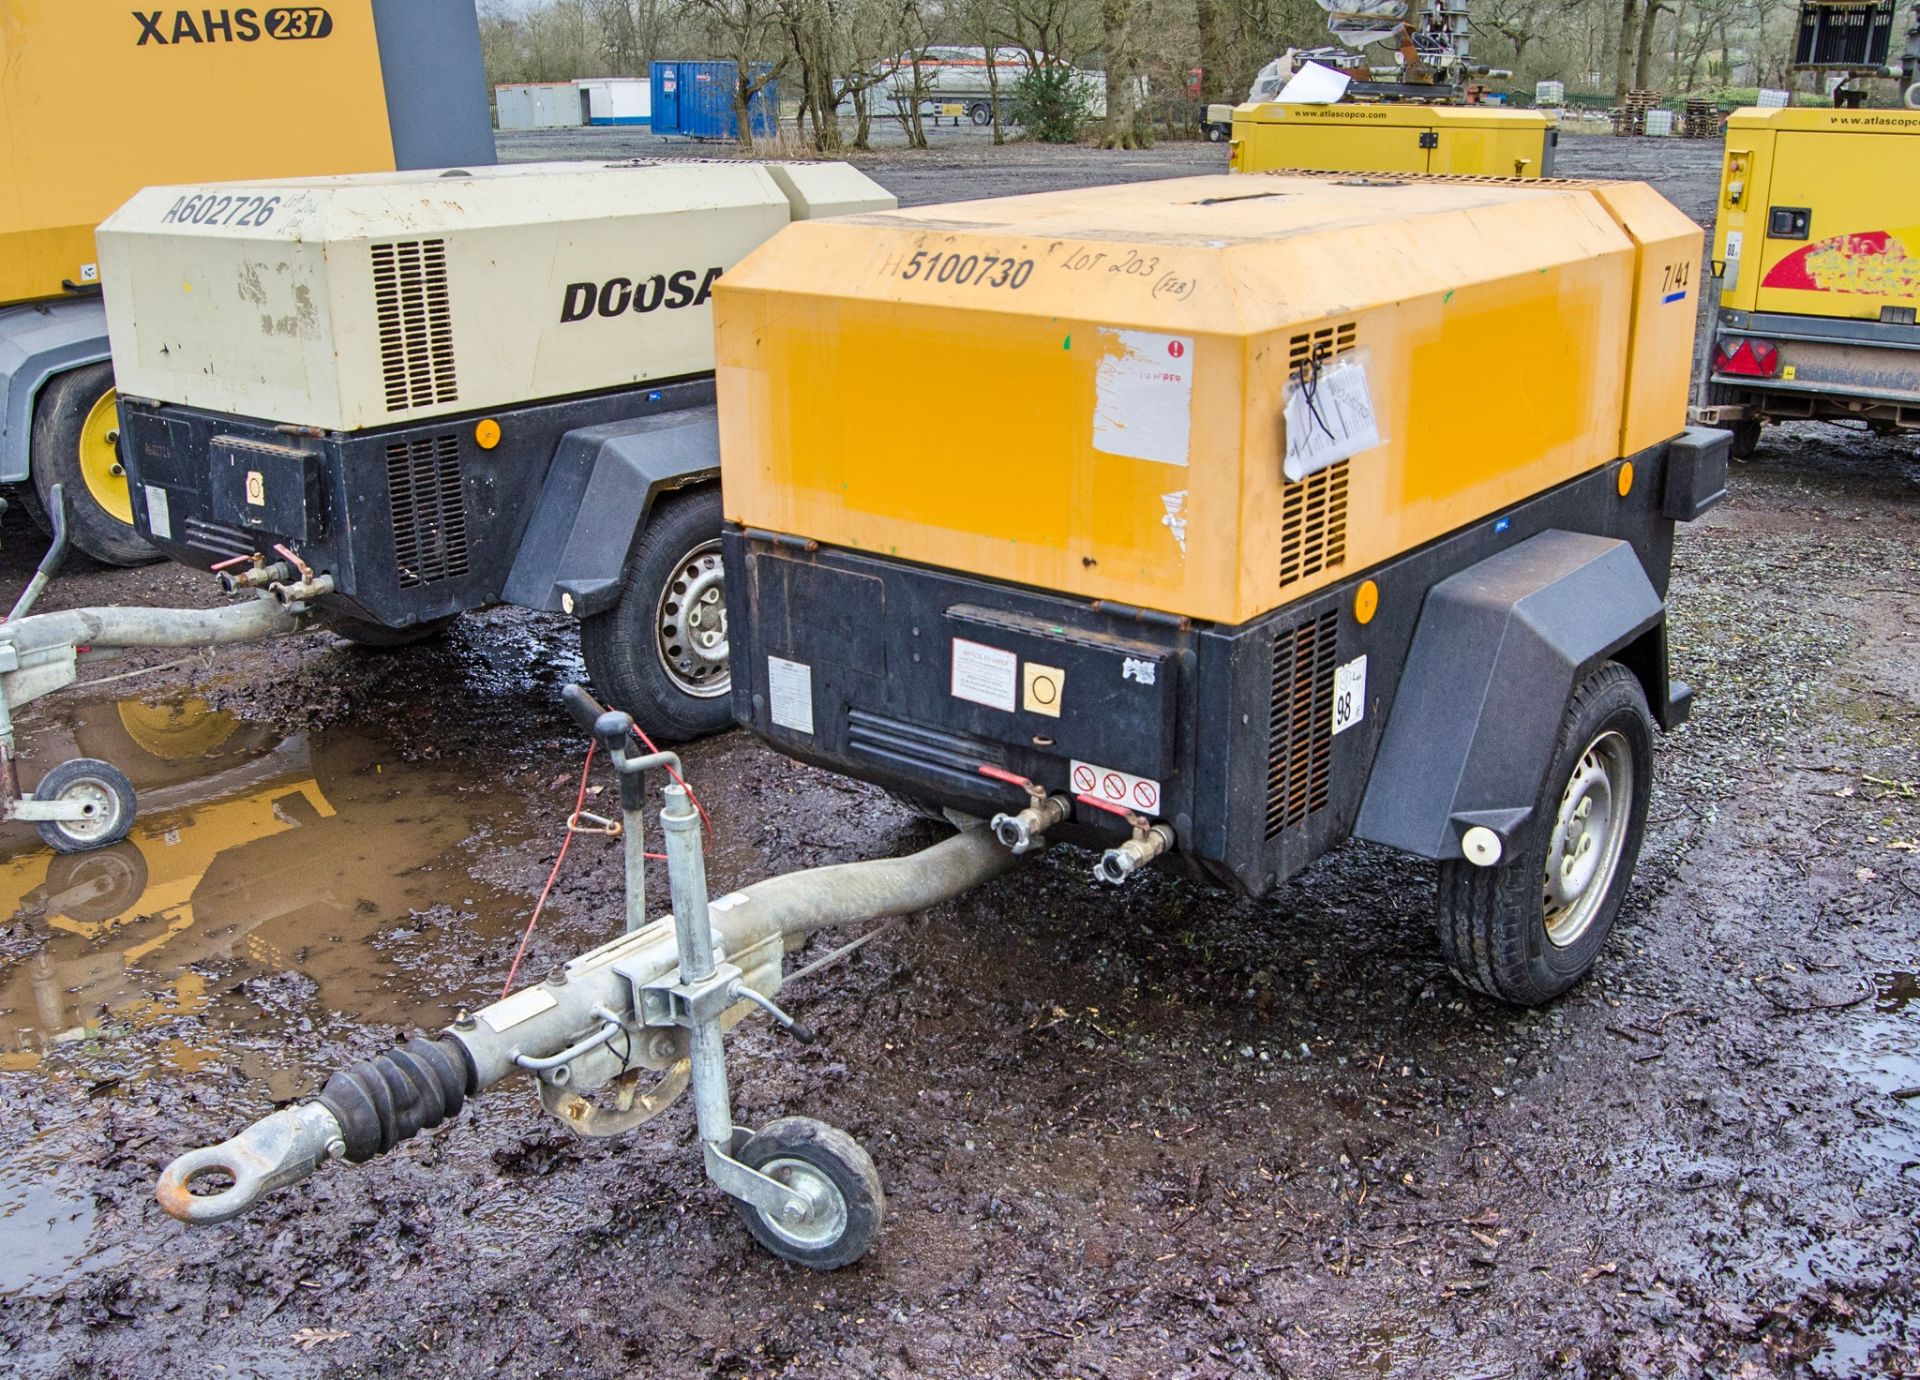 Doosan 7/41 diesel driven fast tow mobile air compressor Year: 2013 S/N: 431907 Recorded Hours: 1445